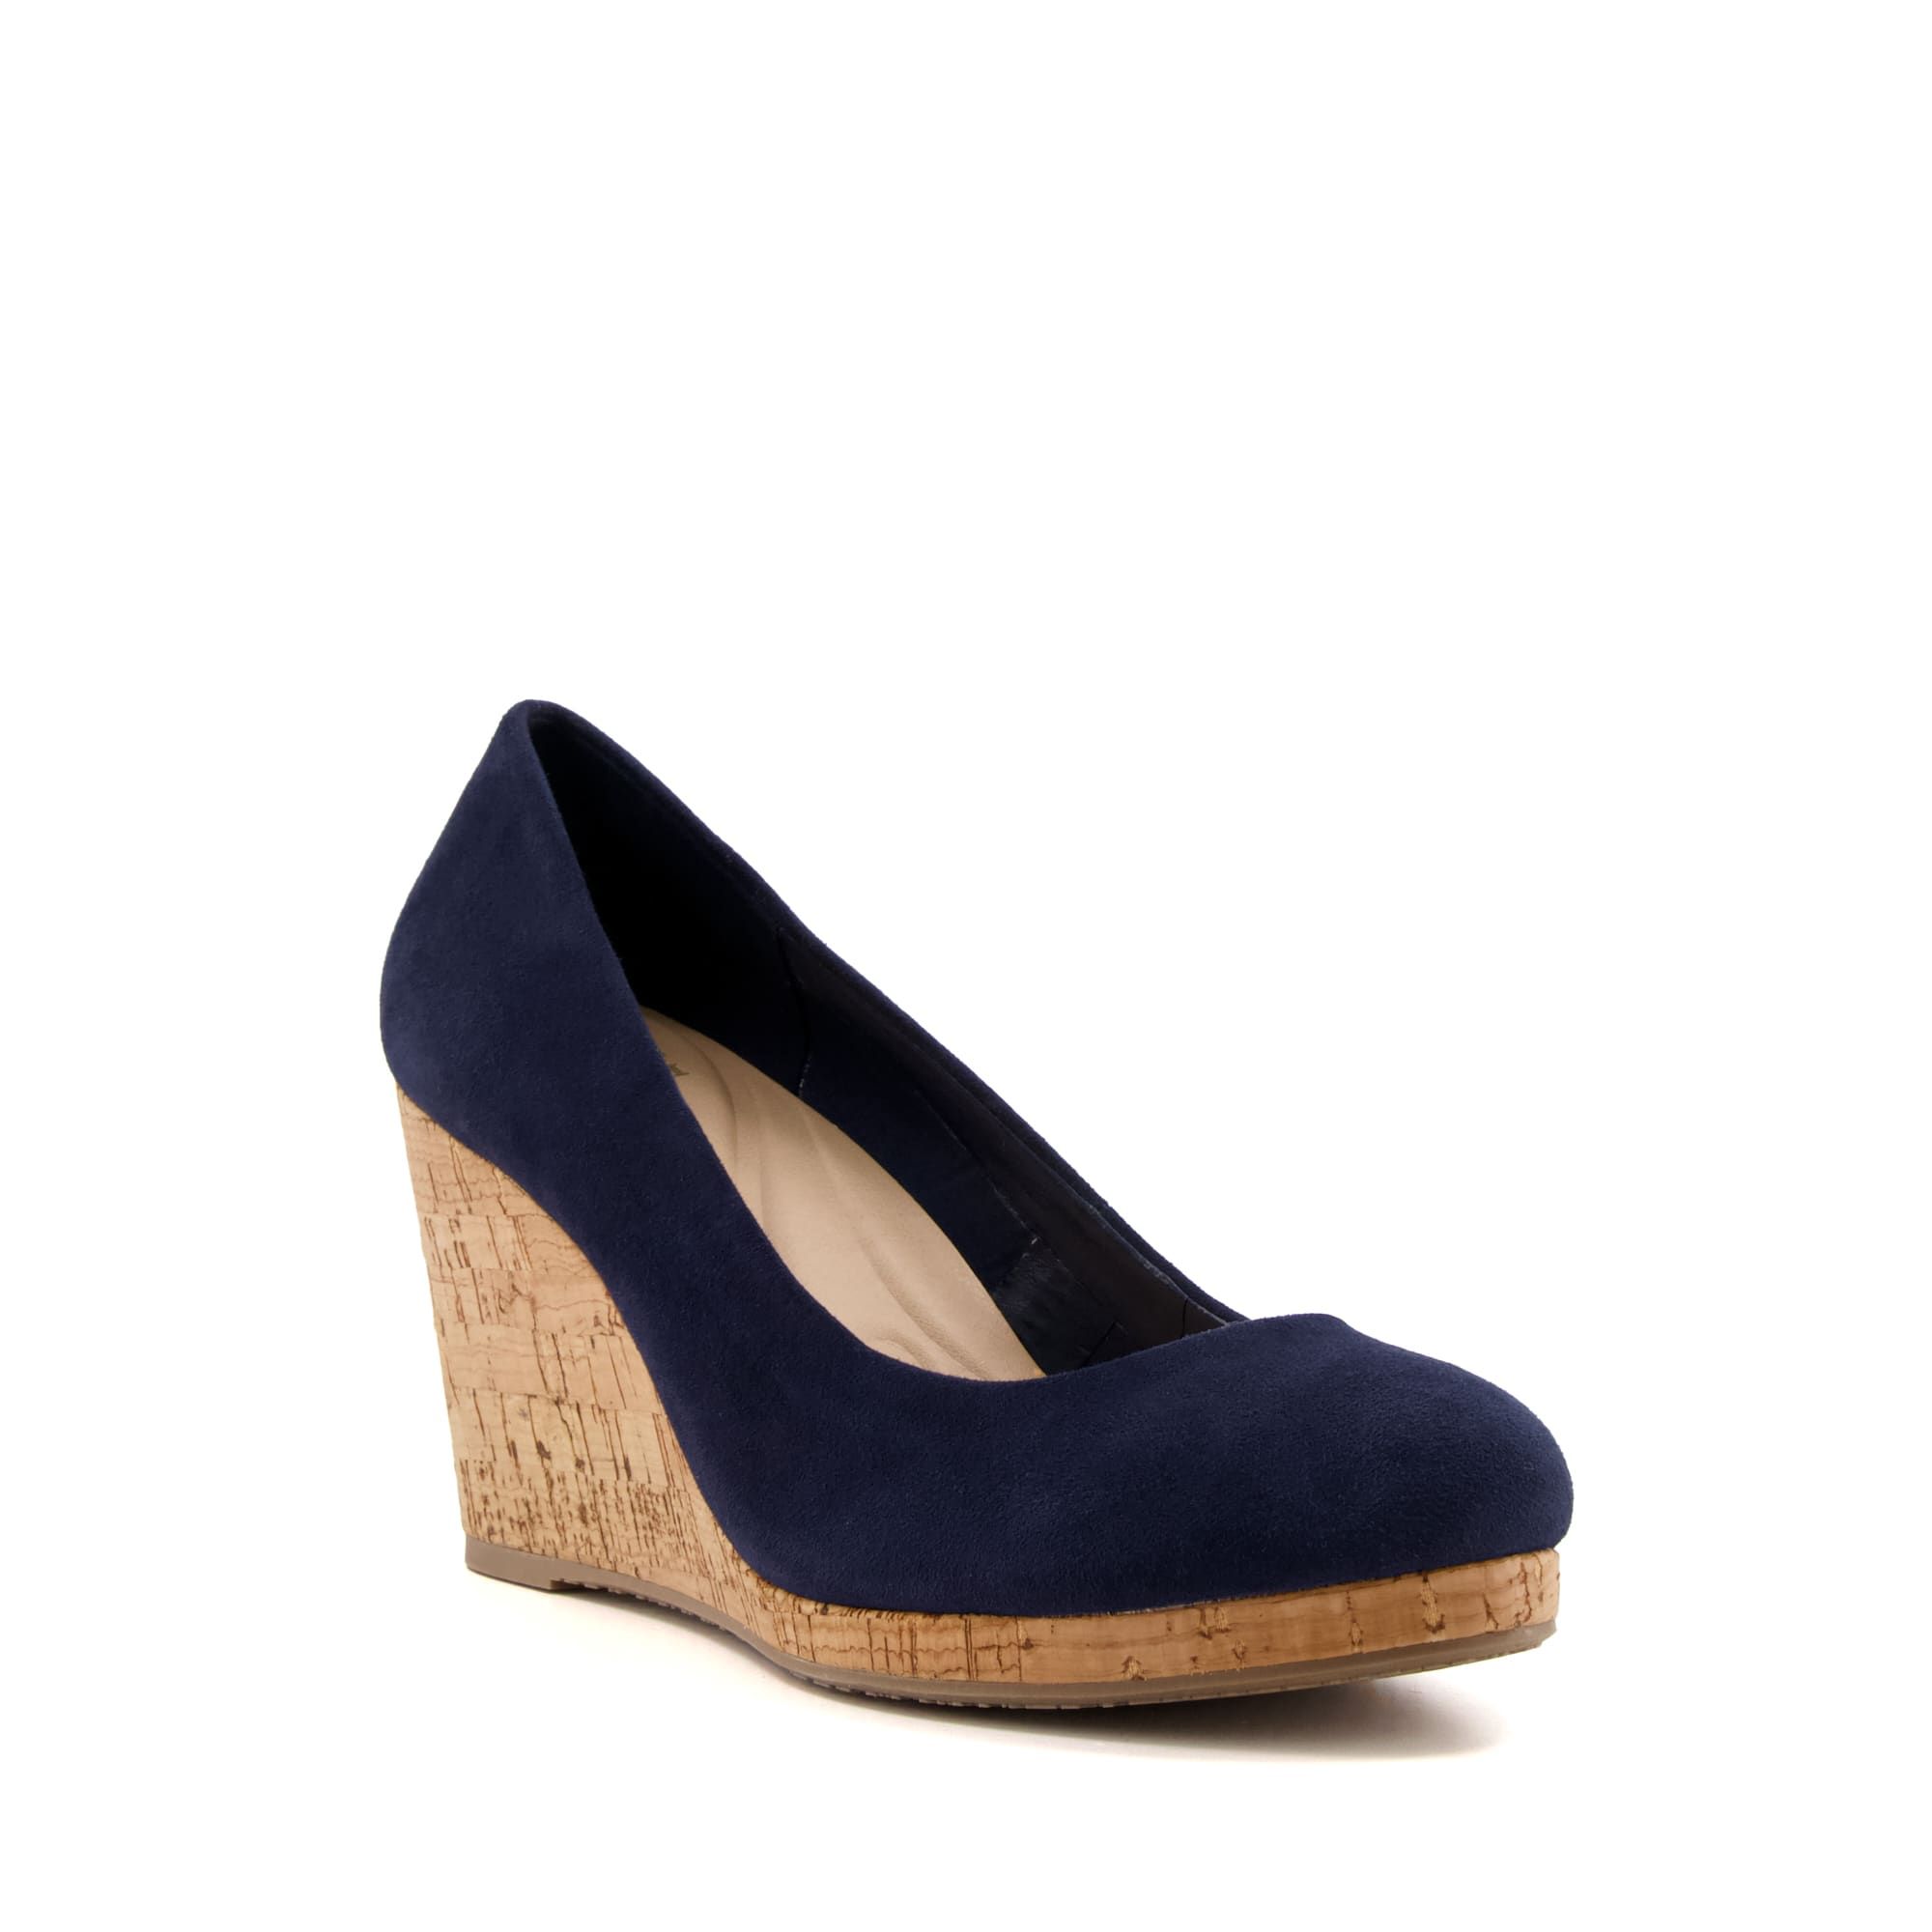 A holiday must-have, these wedges are comfortable, stylish and boast a summery cork sole.